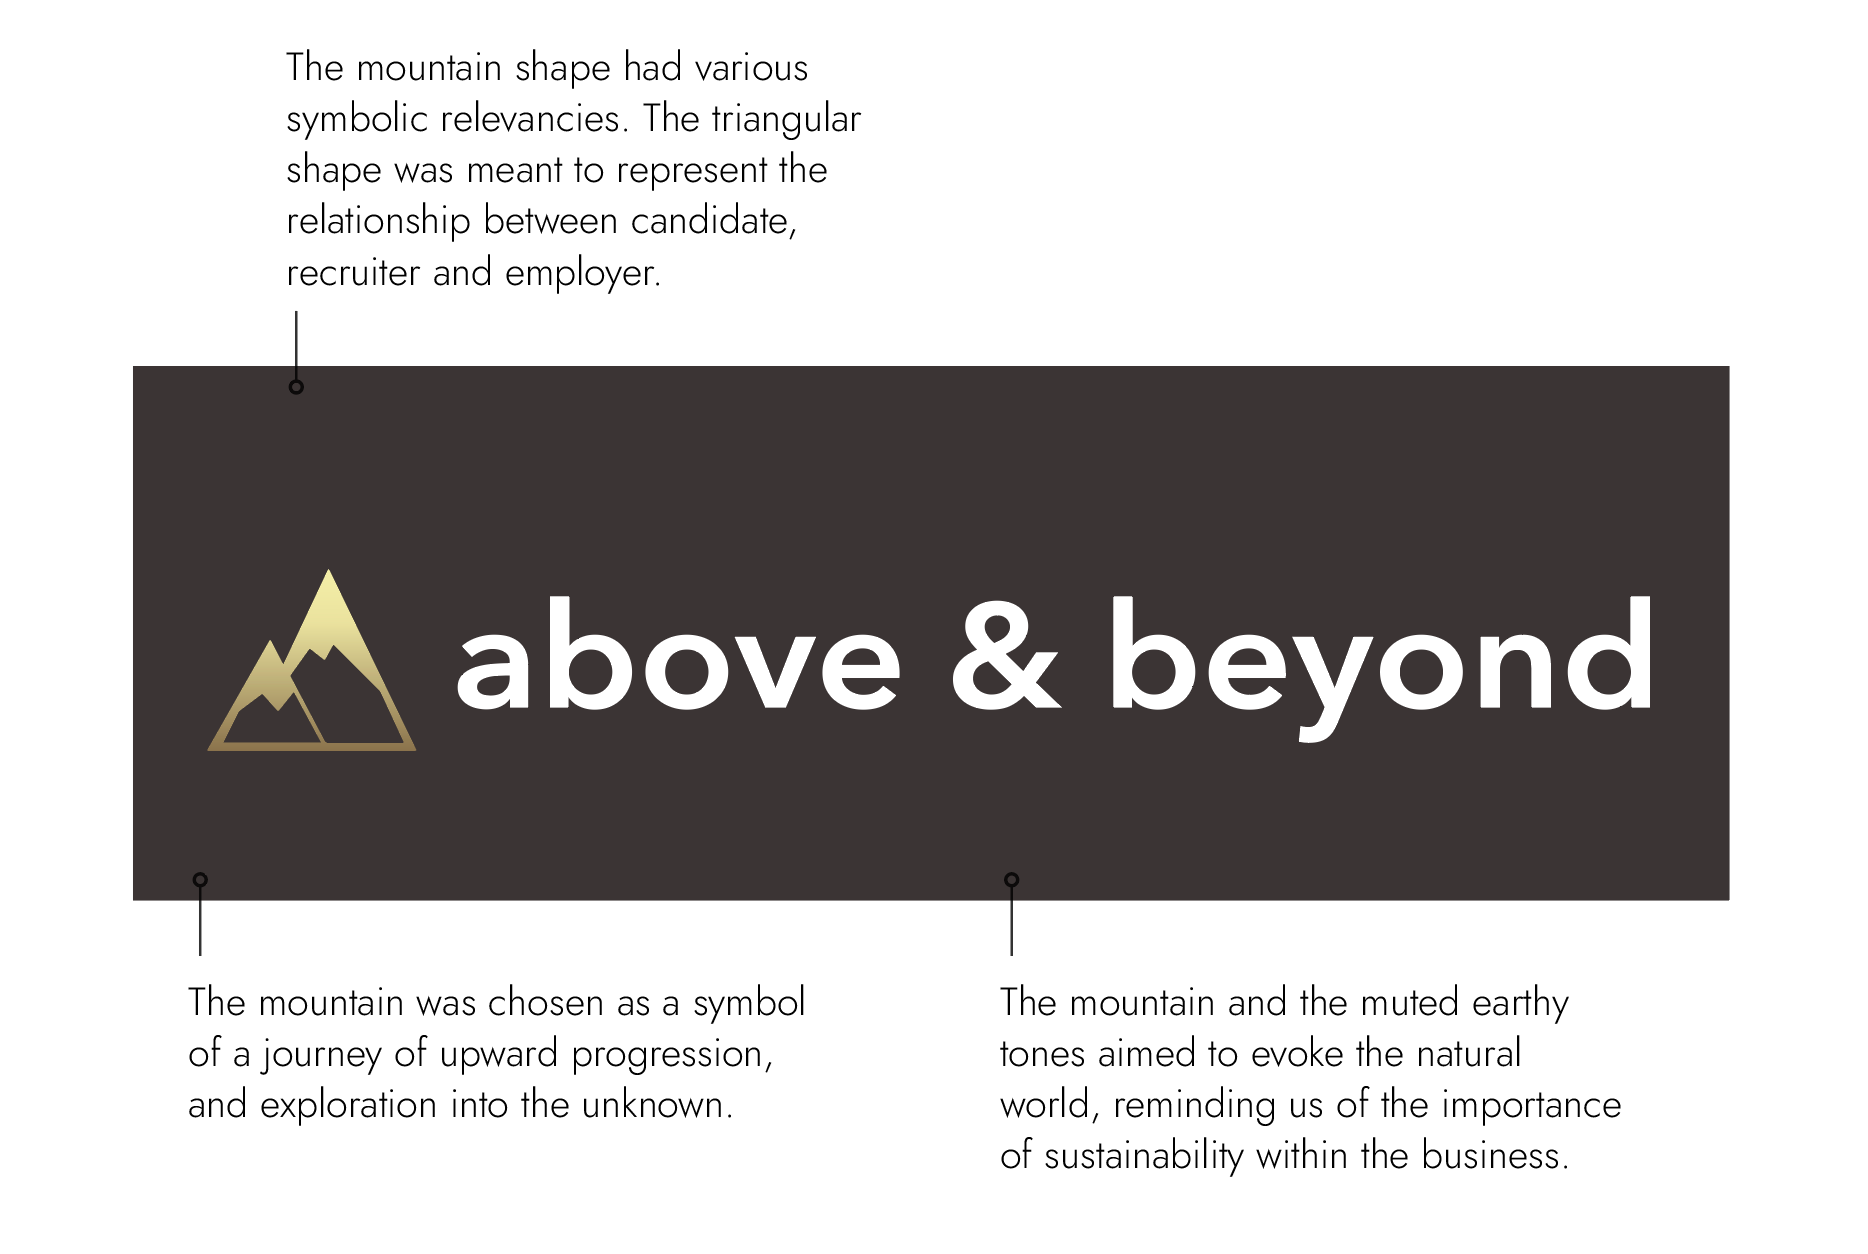 Image of a logo with a mountain and the words above and beyond. There are three text boxes pointing to it that say, 1, the mountain shape shape had various symbolic relevancies. The triangular shape was meant to represent the relationship between candidate, recruiter and employer. 2, The mountain was chosen as a symbol of a journey of upward progression, and exploration into the unknown. 3, The mountain and the muted earthy tones aimed to evoke the natural world, reminding us of the importance of sustainability within the business.